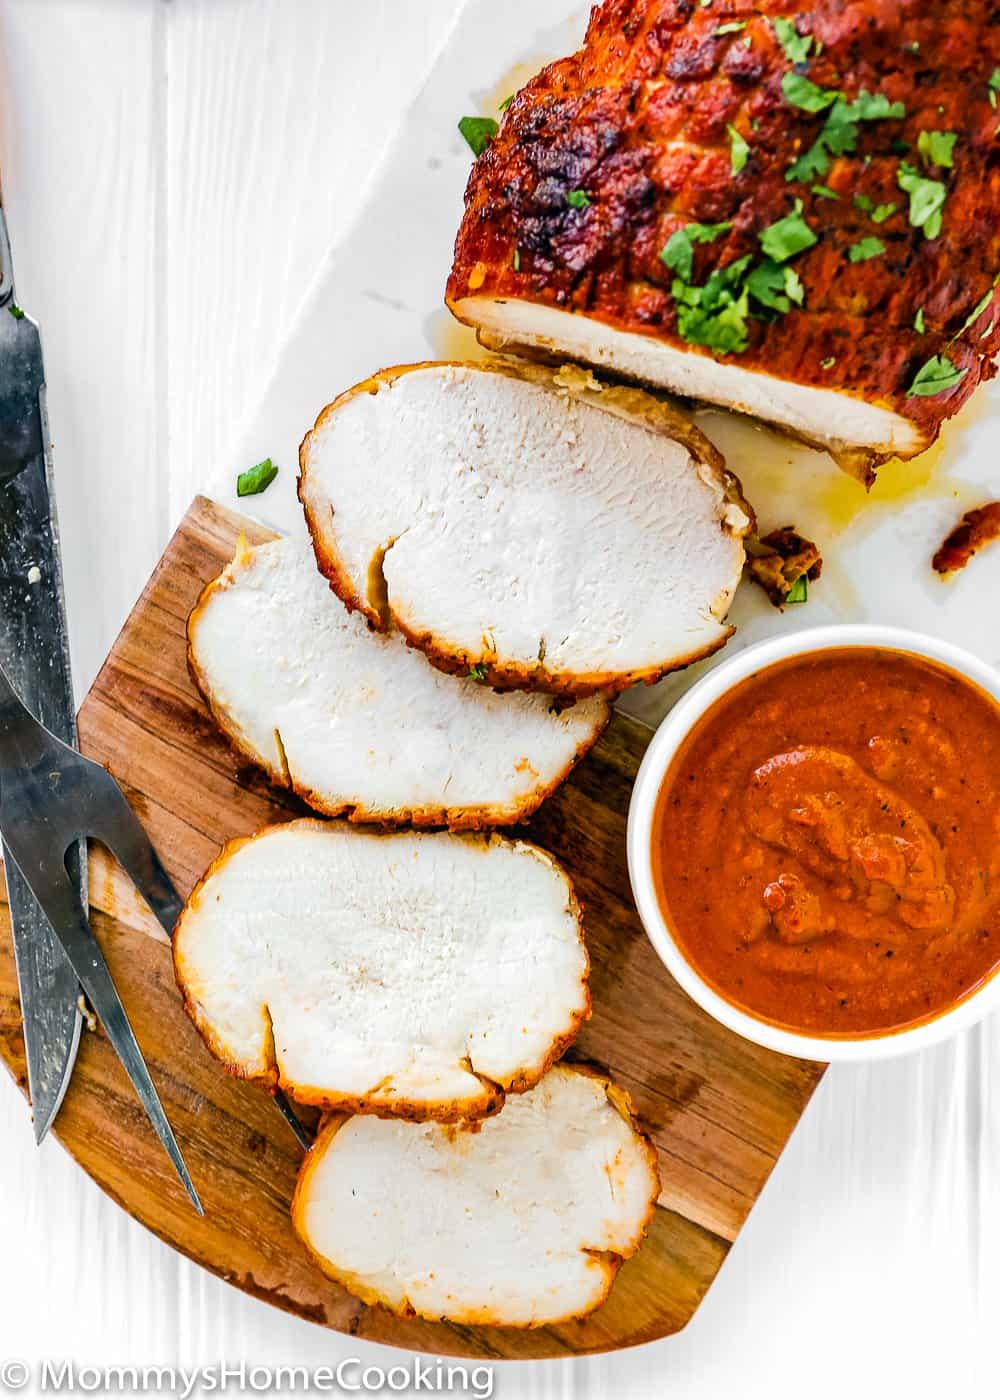 sliced Chipotle Turkey Breast Roast with chipotle sauce